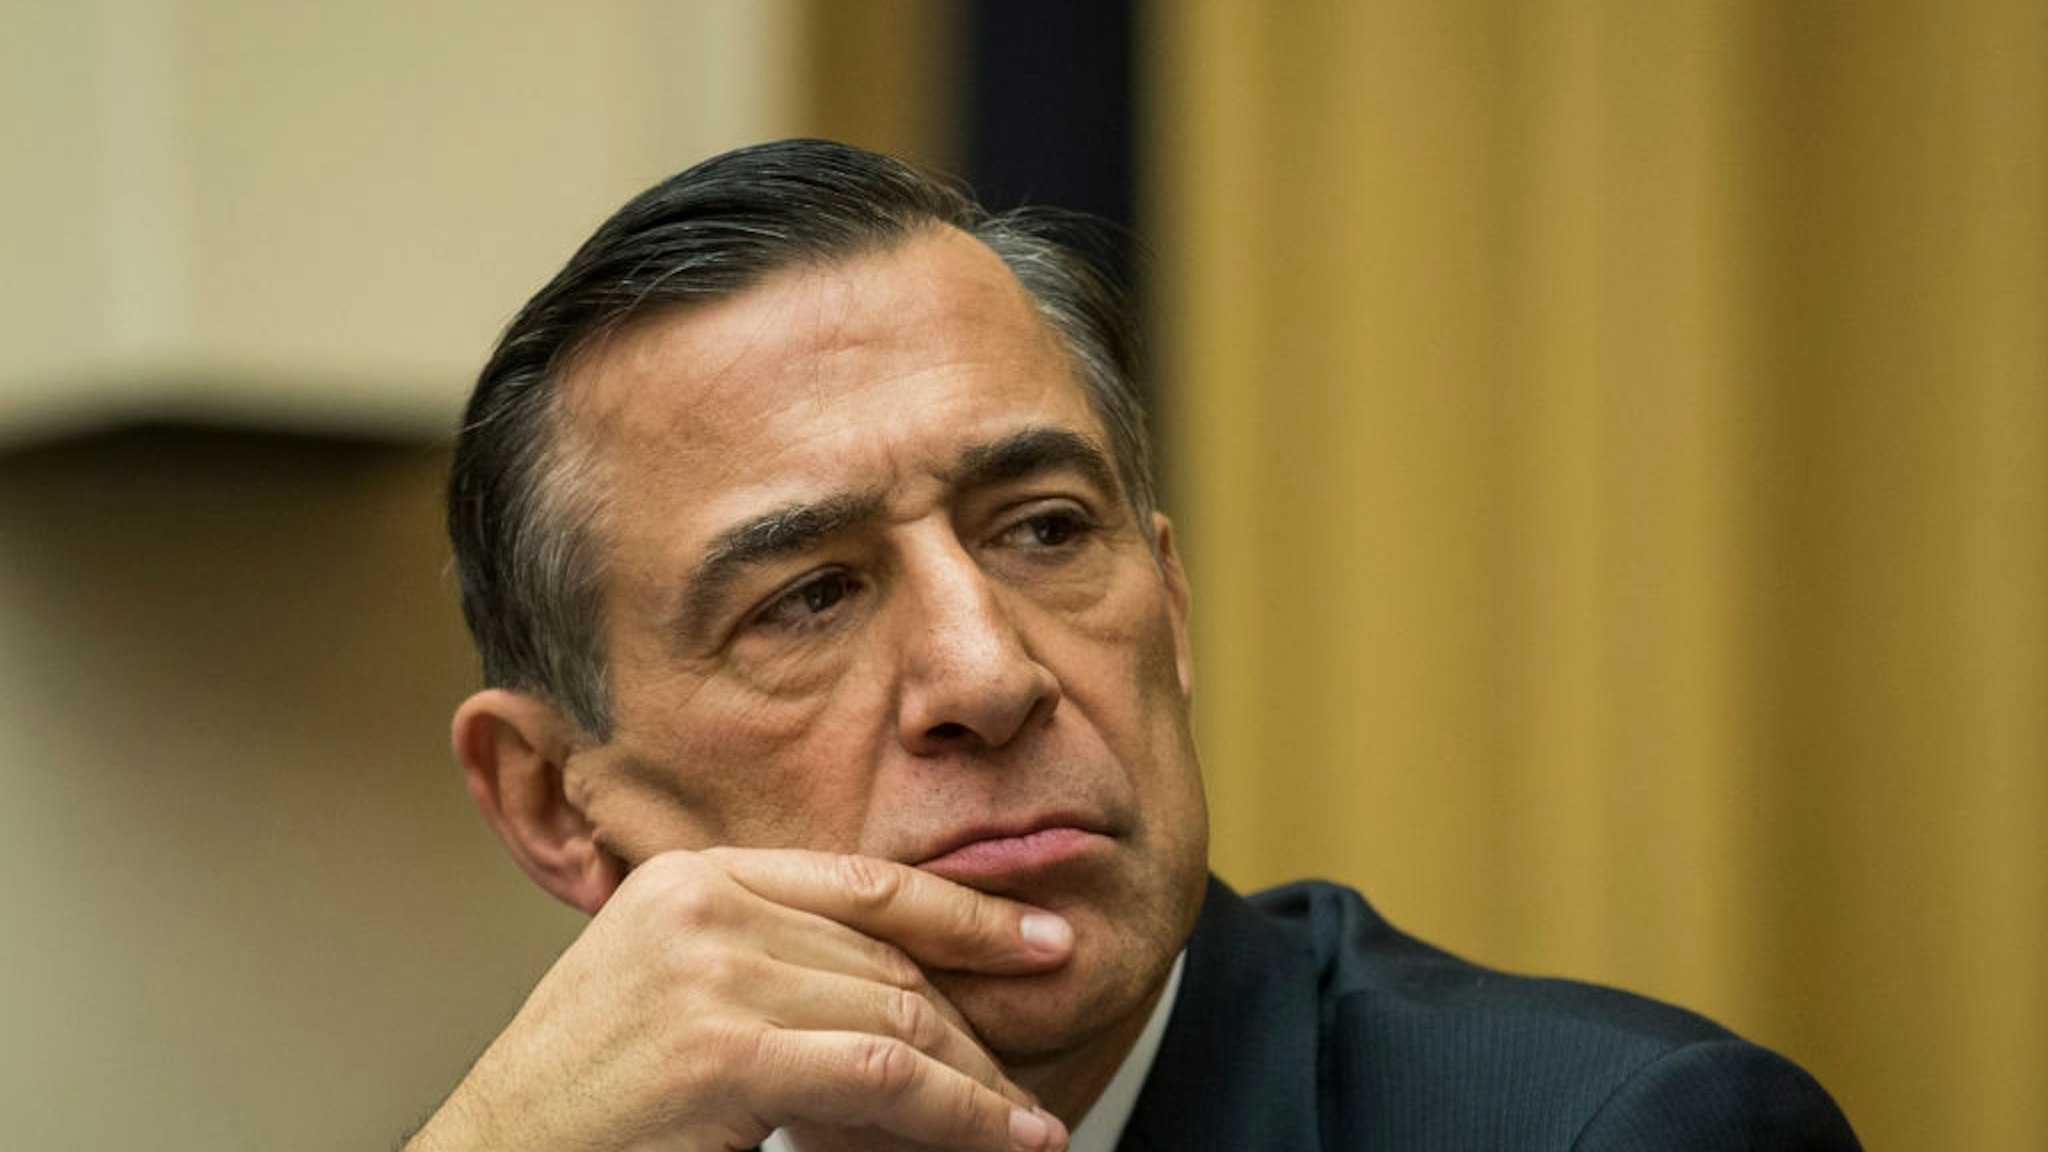 Rep. Darrell Issa (R-CA) listens during a House Judiciary Subcommittee hearing on the proposed merger of CVS Health and Aetna, on Capitol Hill, February 27, 2018 in Washington, DC. (Drew Angerer/Getty Images)